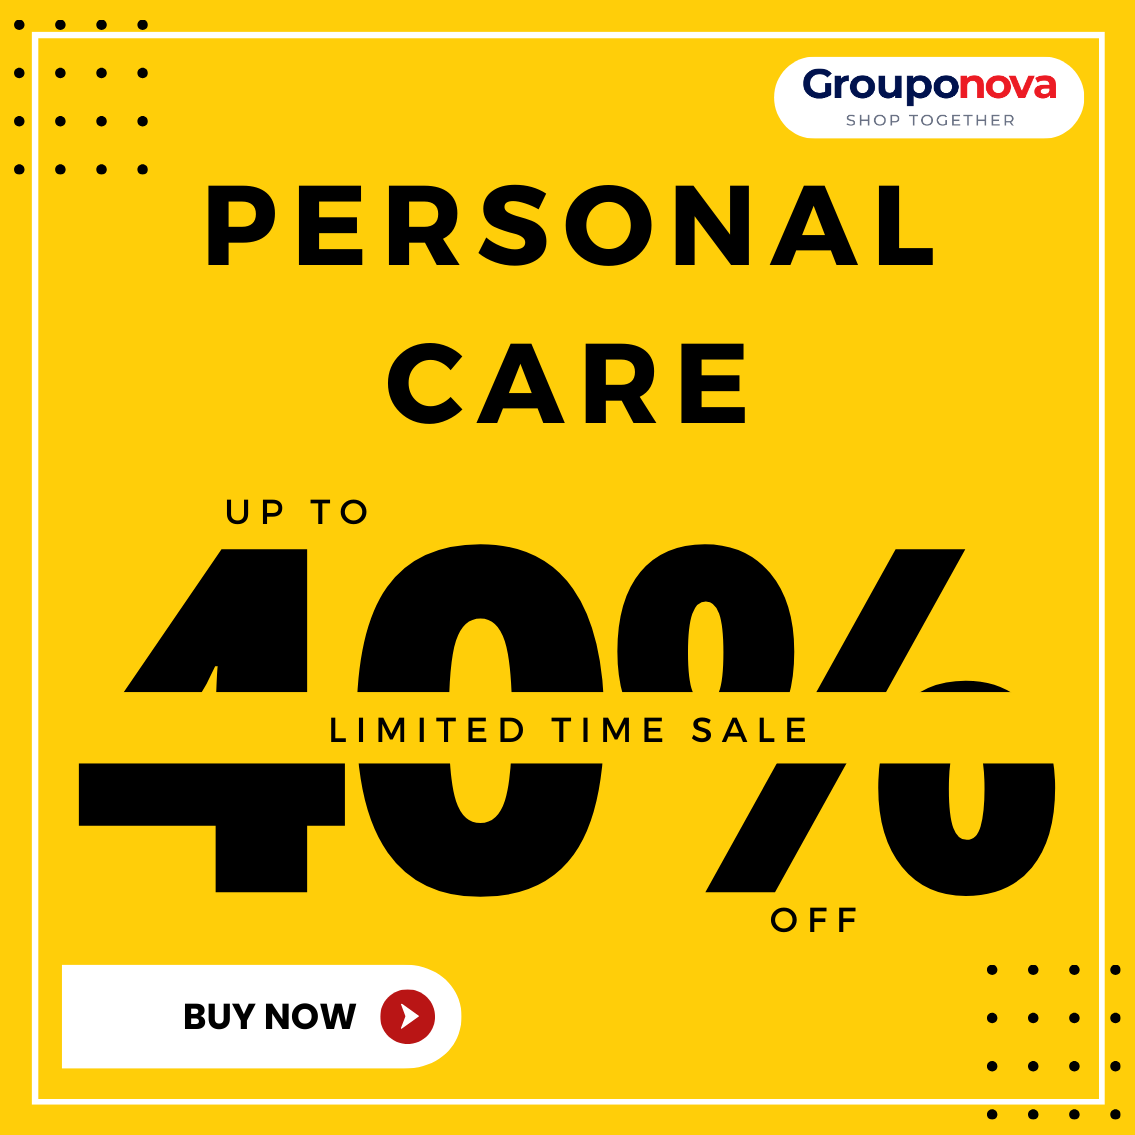 Pamper yourself with amazing personal care products from grouponova.com

Get up to 40% off on shampoos, toothpastes, shaving creams, and more.

Shop now before it's too late.

#personalcare #grouponova #limitedtimesale #groupbuy #makeup